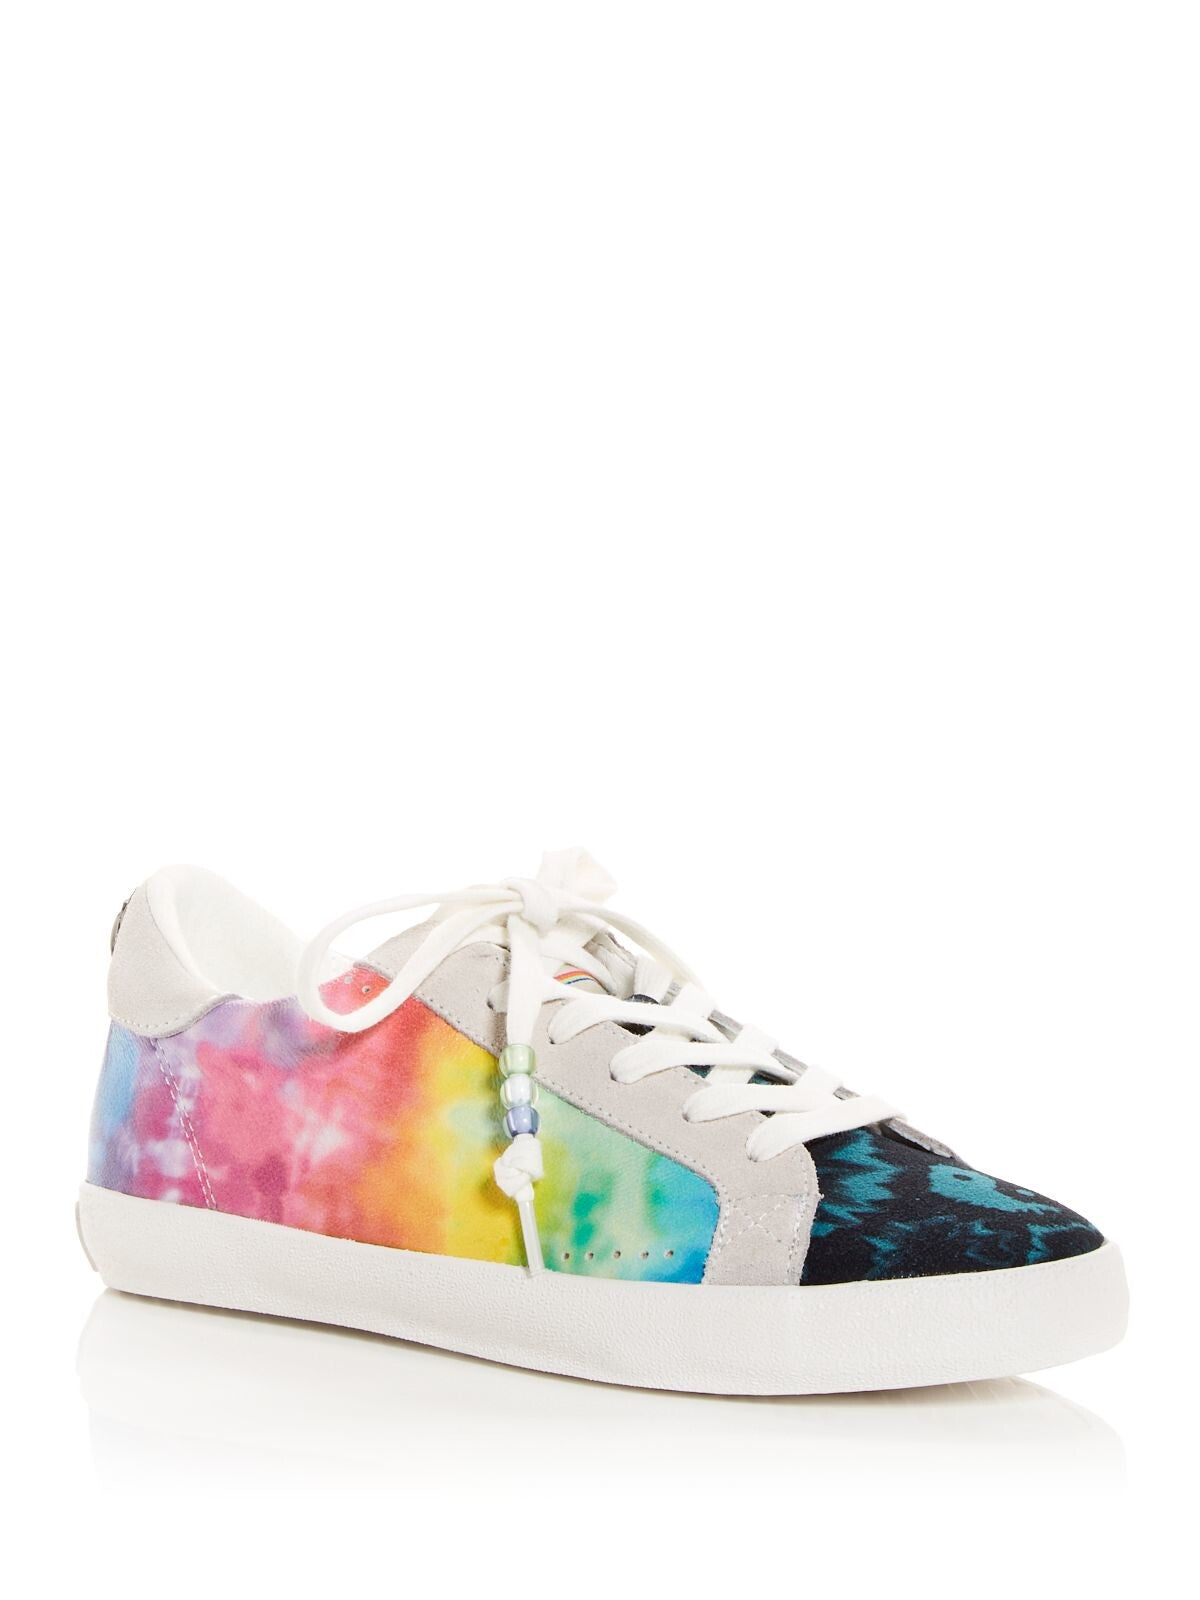 KURT GEIGER Womens Gray Tie Dye Embellished Removable Insole Lexi Round Toe Platform Lace-Up Athletic Sneakers Shoes 36.5